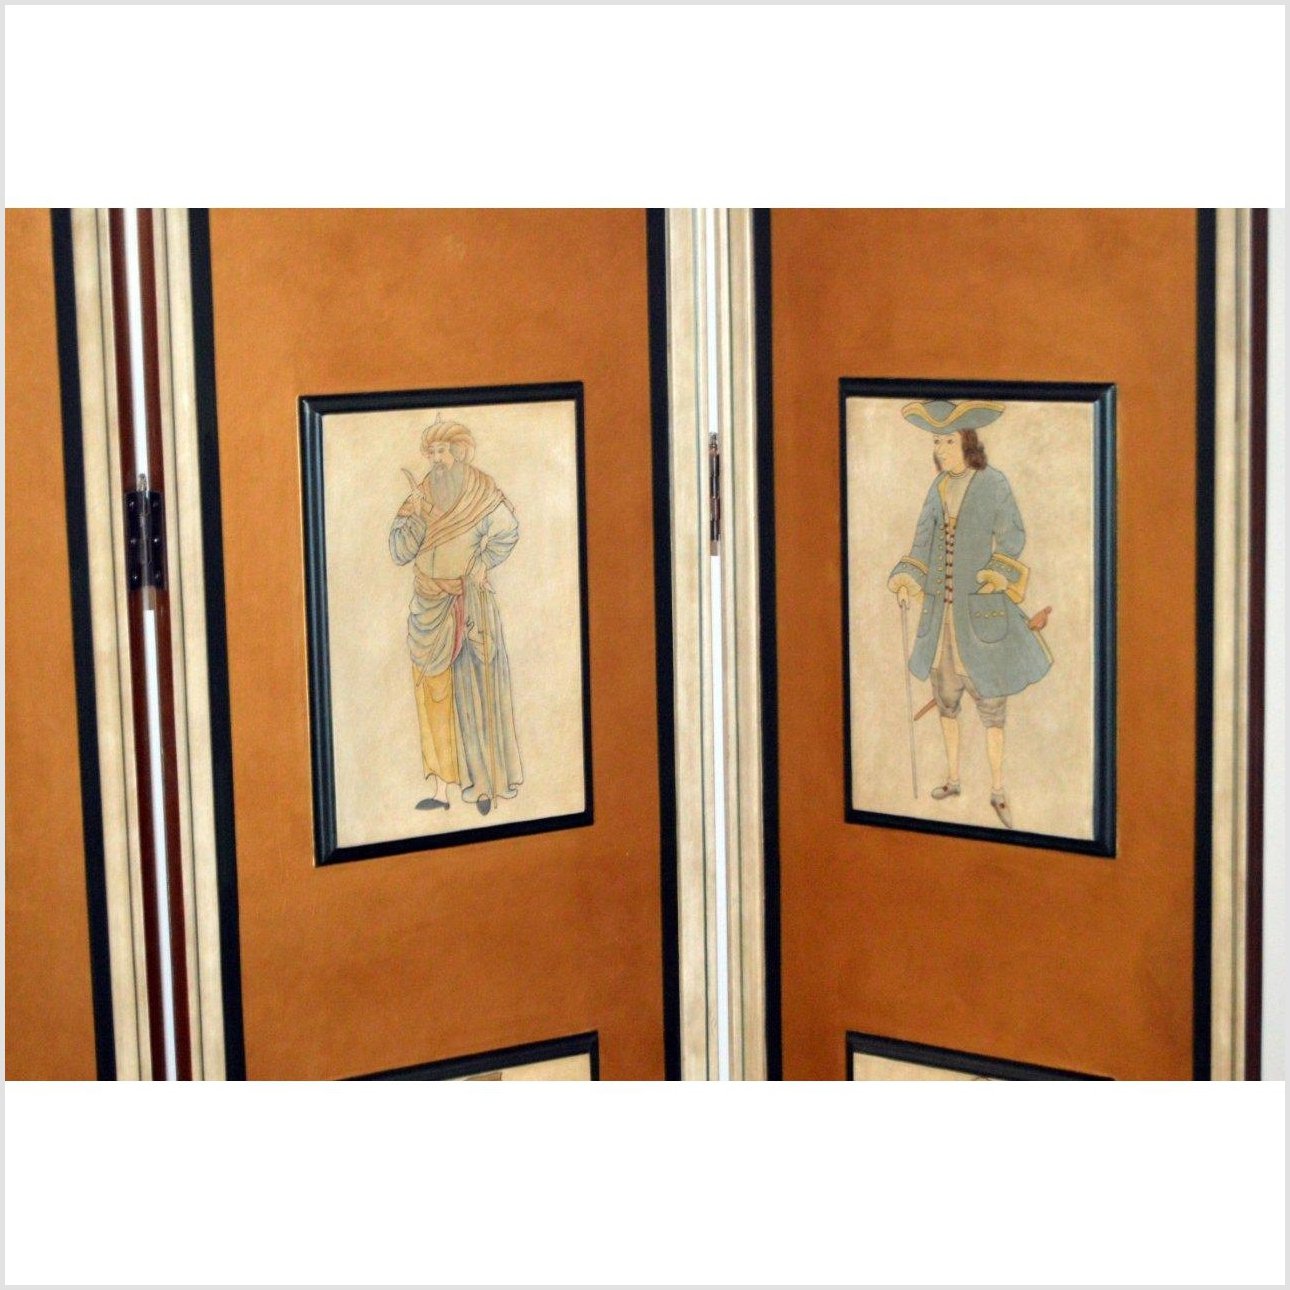 4-Panel Screen with Individual Frames of Men from Different Nations-YN2855 / YN2881-4. Asian & Chinese Furniture, Art, Antiques, Vintage Home Décor for sale at FEA Home